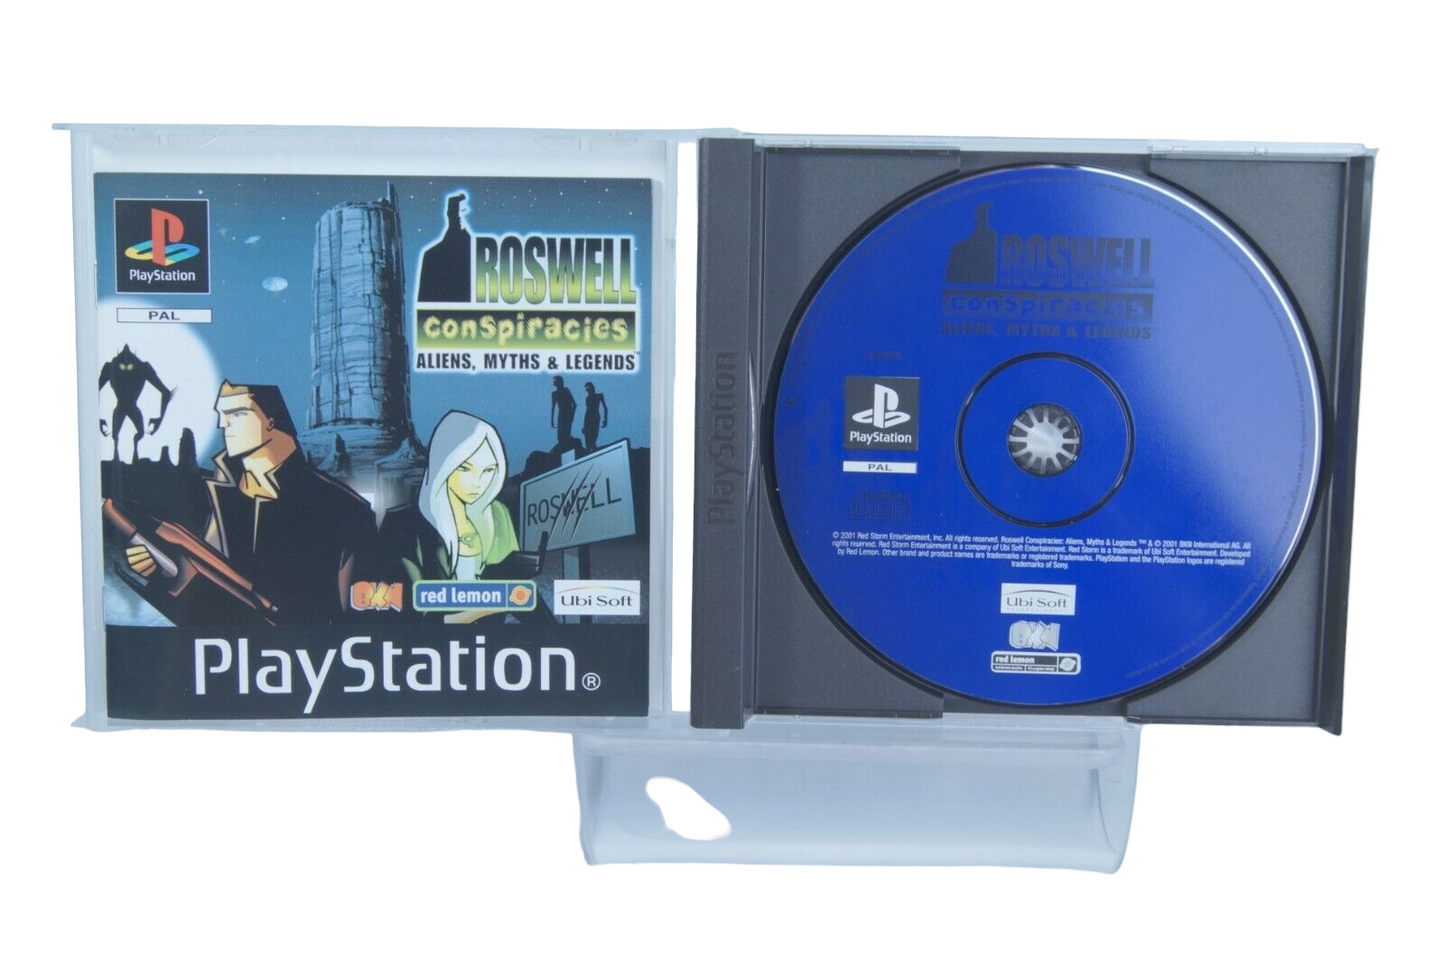 Roswell Conspiracies - Playstation 1